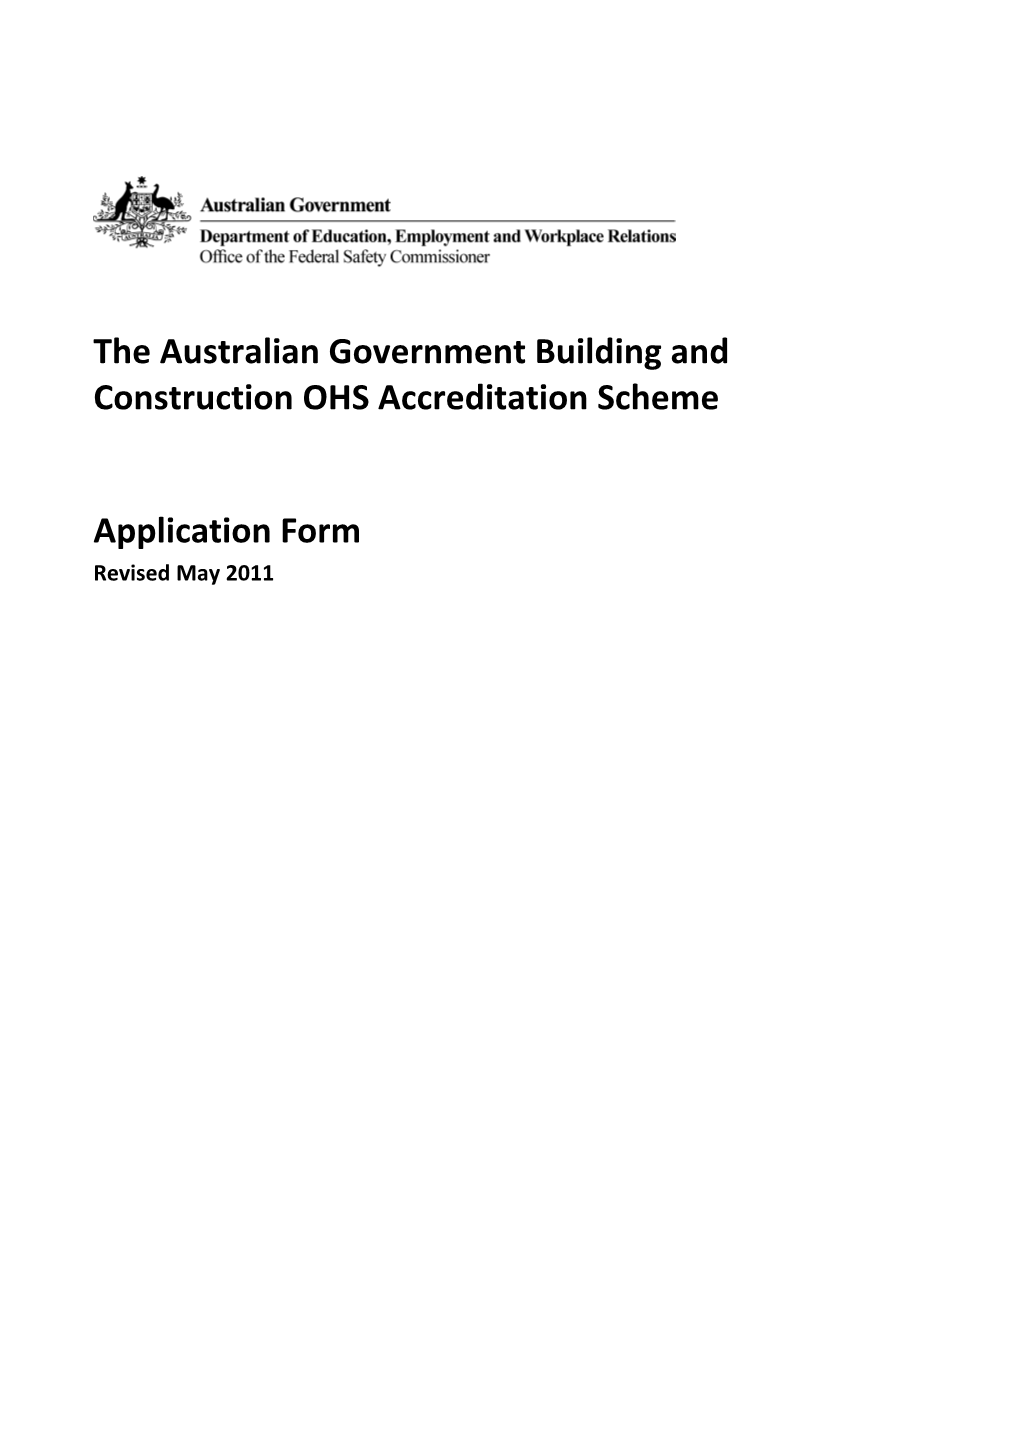 The Australian Government Building and Construction OHS Accreditation Scheme